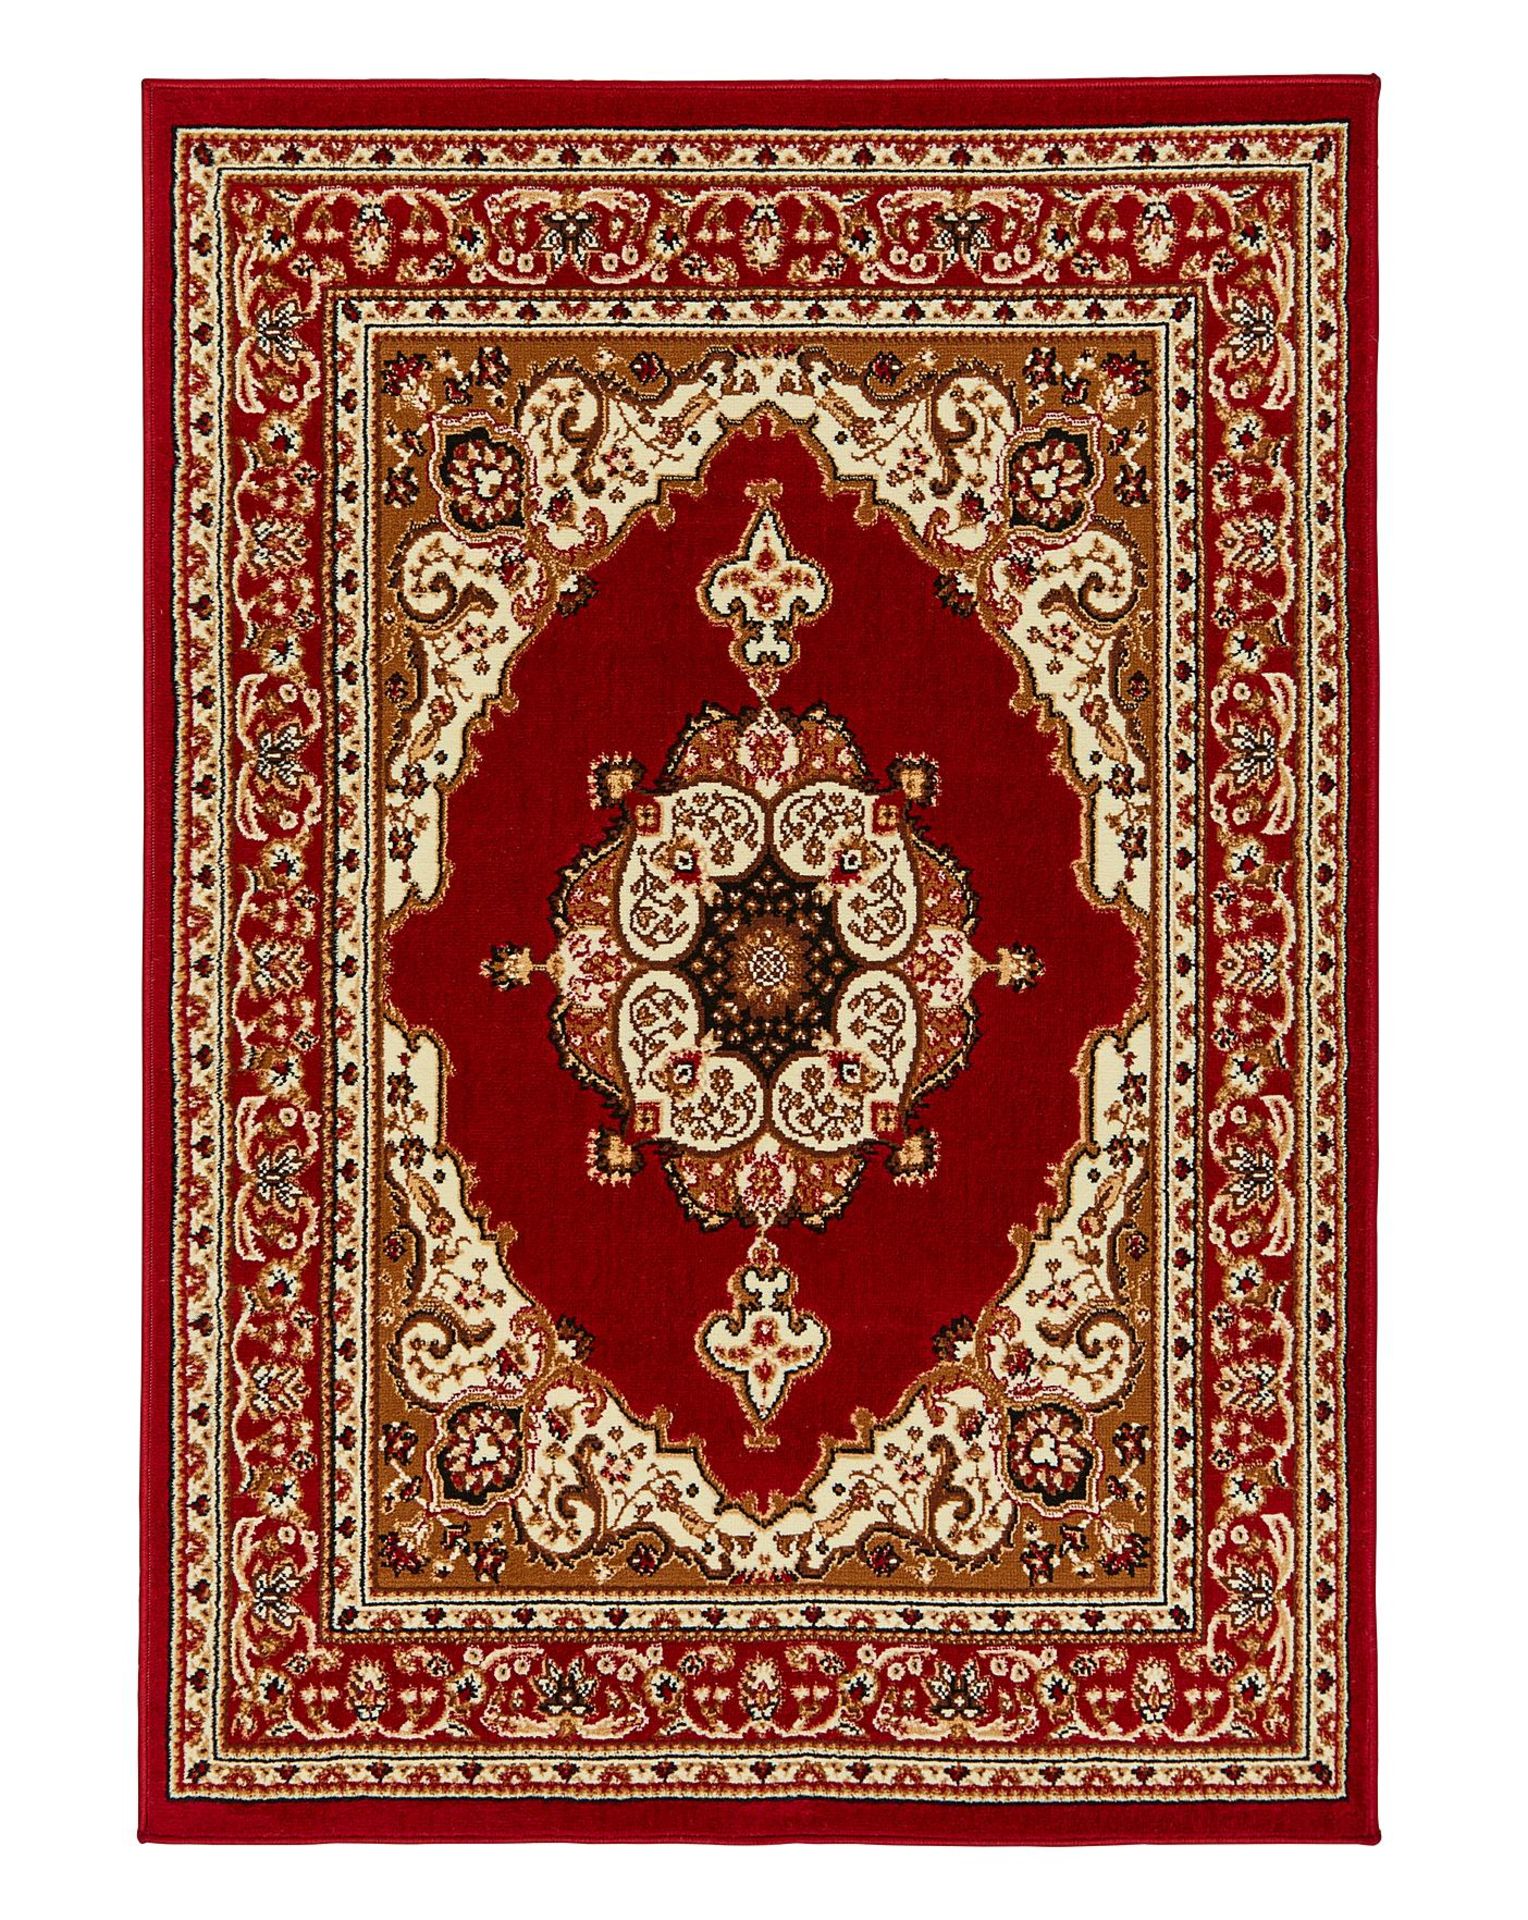 BAGGED MERLOR RUG IN RED 160X230 RRP £49.99Condition ReportAppraisal Available on Request- All Items